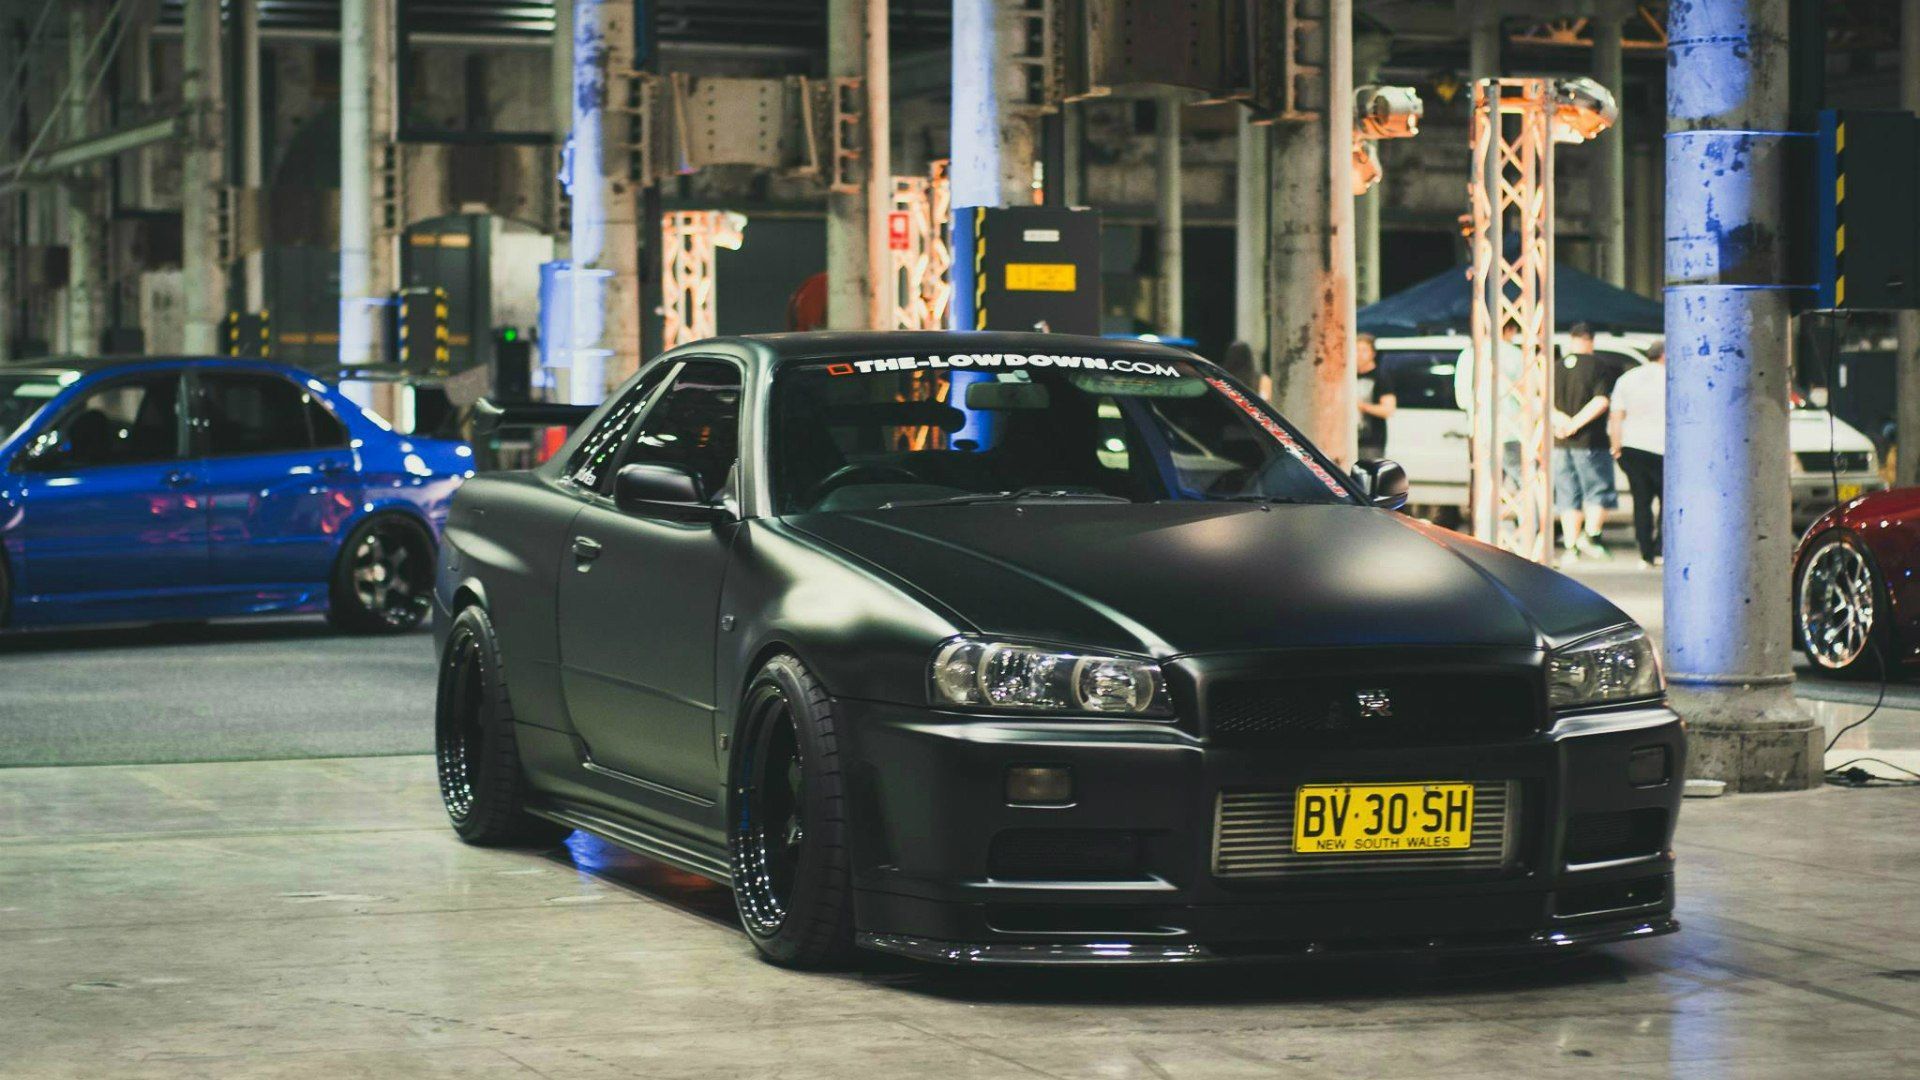 Black Nissan Skyline GTR R34 wallpapers and images - wallpapers ...